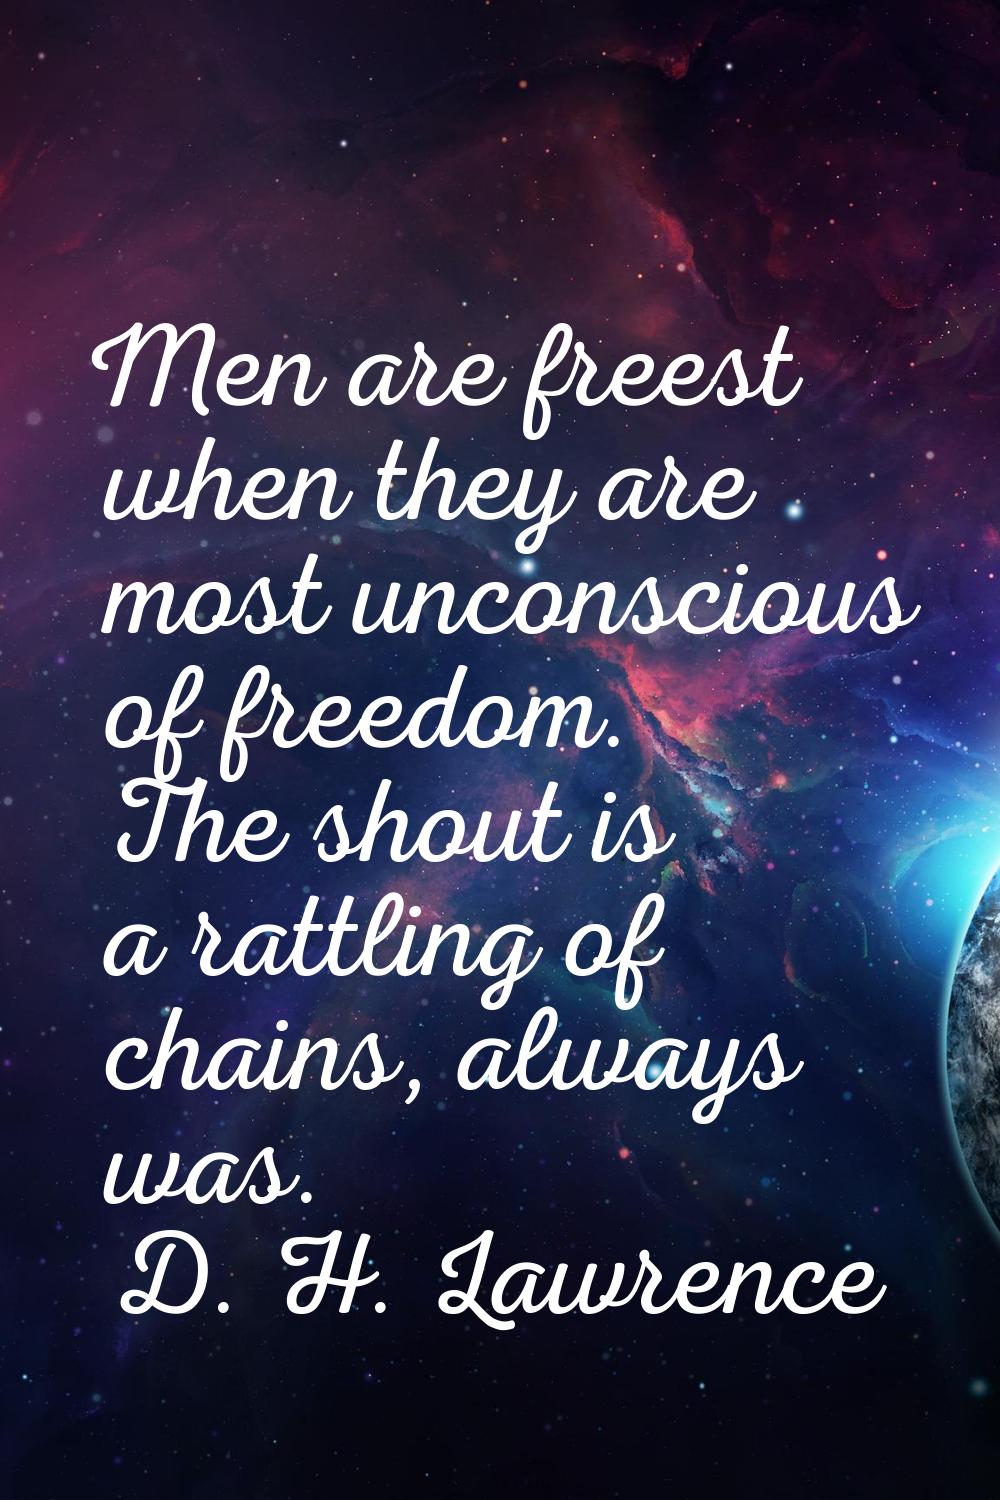 Men are freest when they are most unconscious of freedom. The shout is a rattling of chains, always